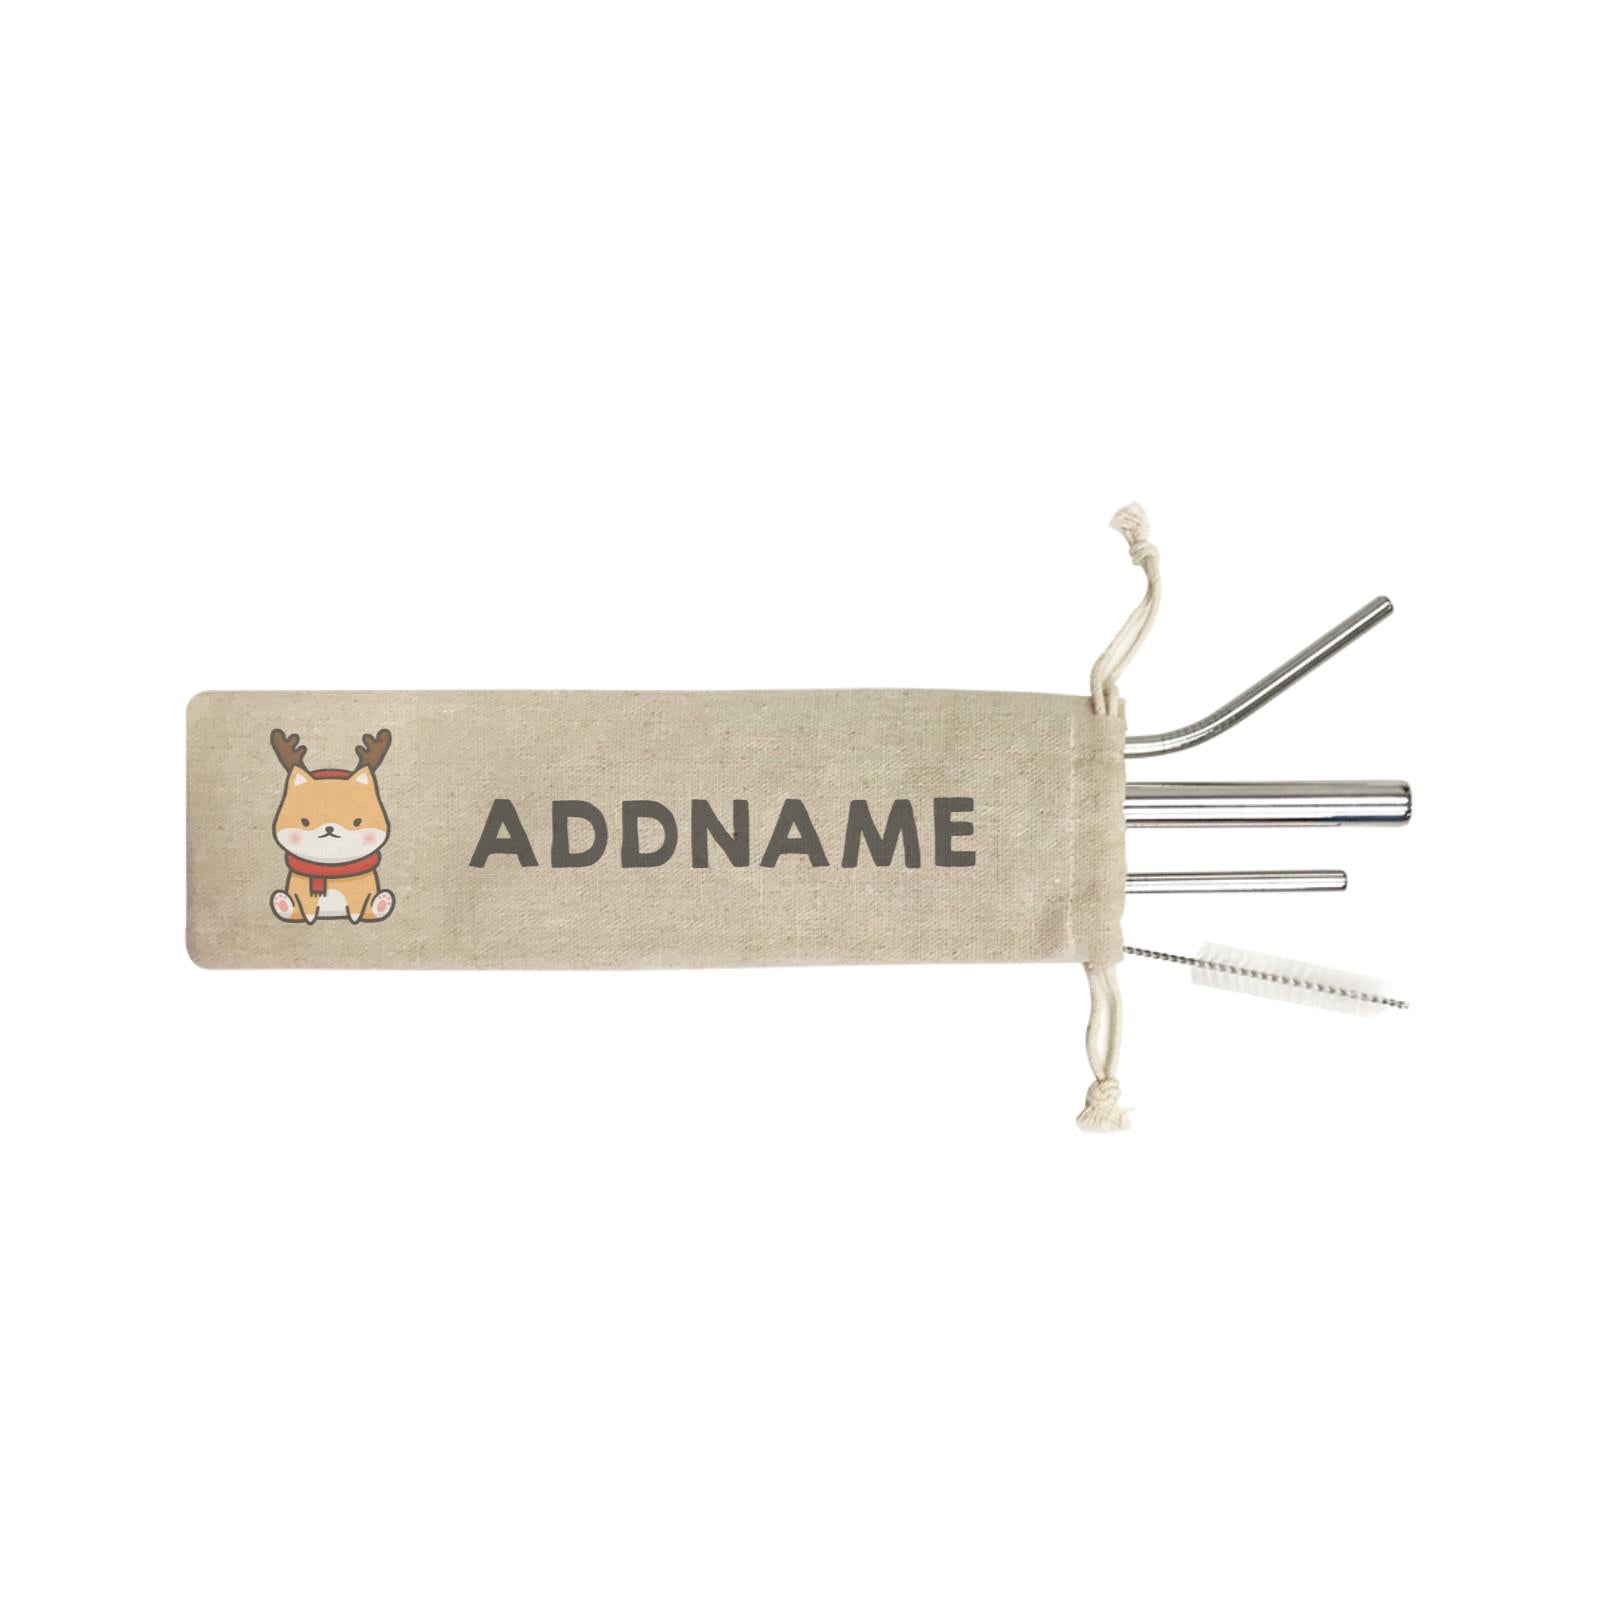 Xmas Cute Shiba Inu Sitting Addname SB 4-in-1 Stainless Steel Straw Set In a Satchel